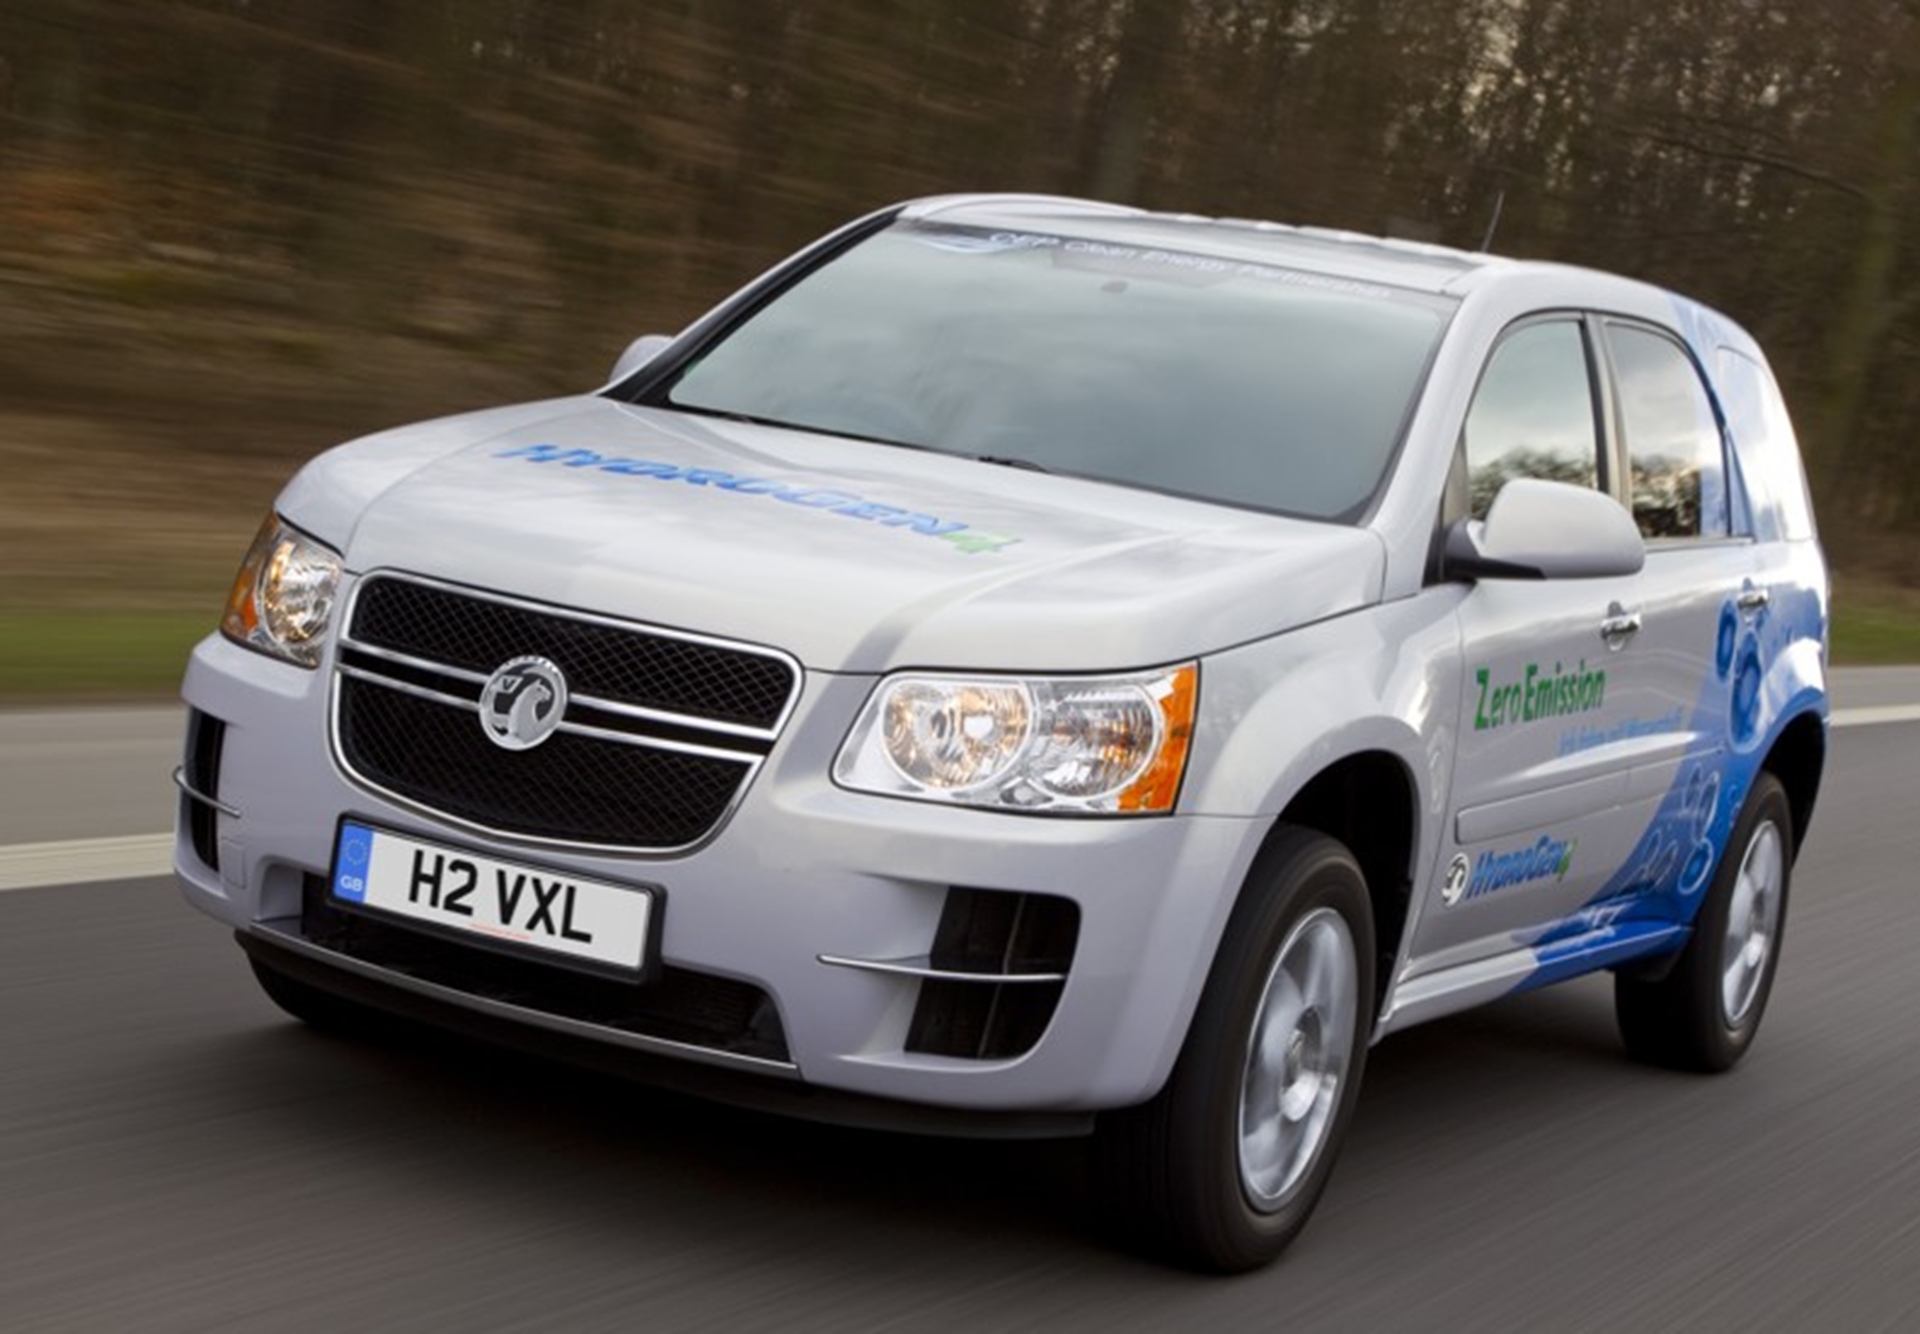 UK H2MOBILITY – VAUXHALL DRIVES HYDROGEN 4 GENERATIONS